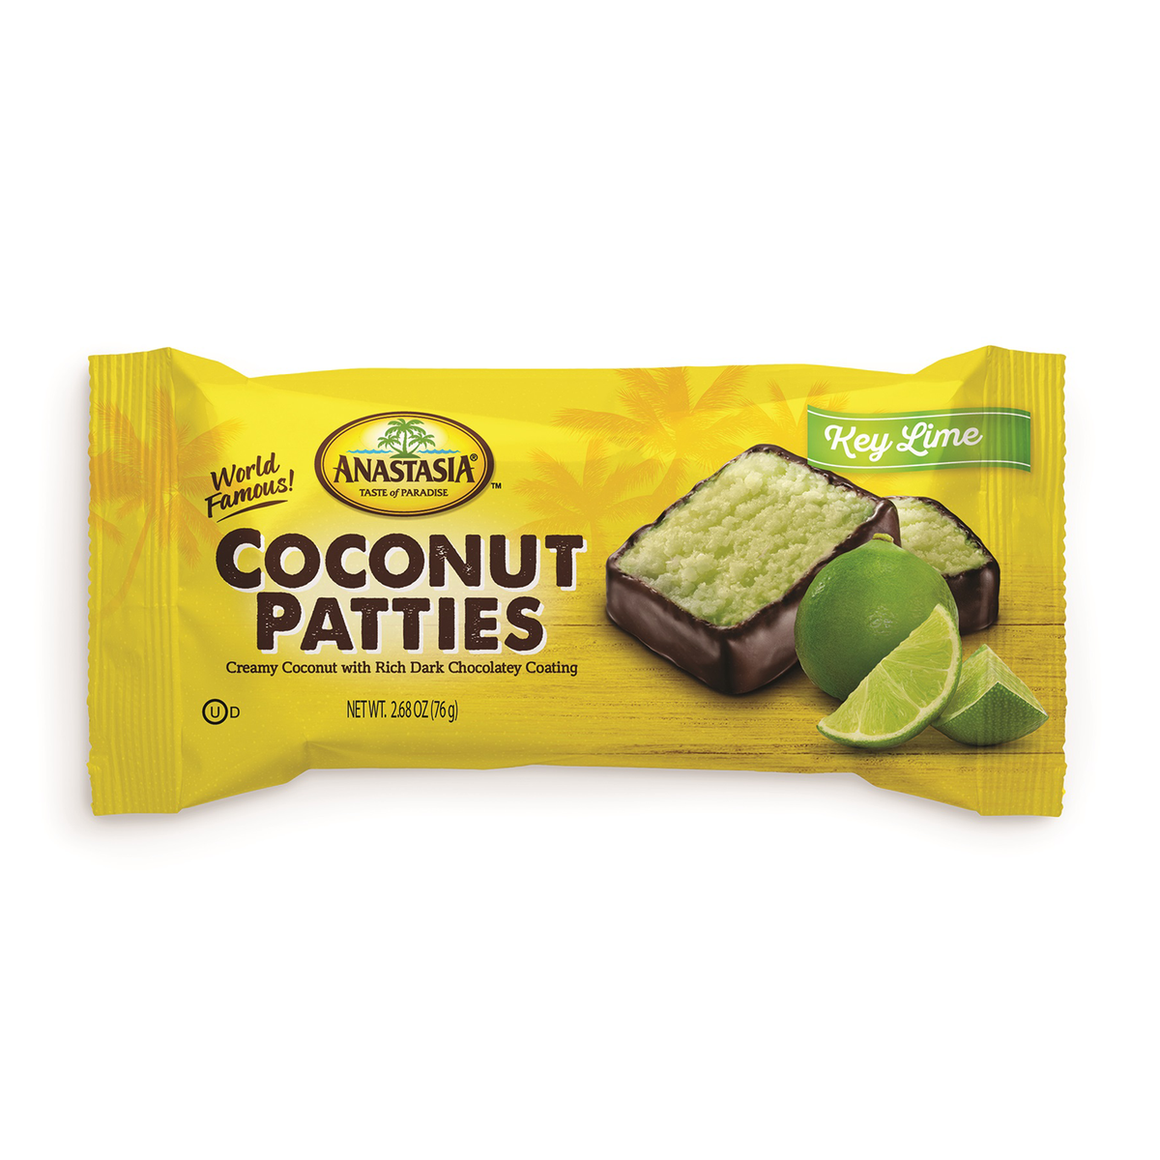 All City Candy Key Lime Coconut Patties 2-Pack 2.5-oz. Candy Bars Anastasia Confections 1 Piece For fresh candy and great service, visit www.allcitycandy.com